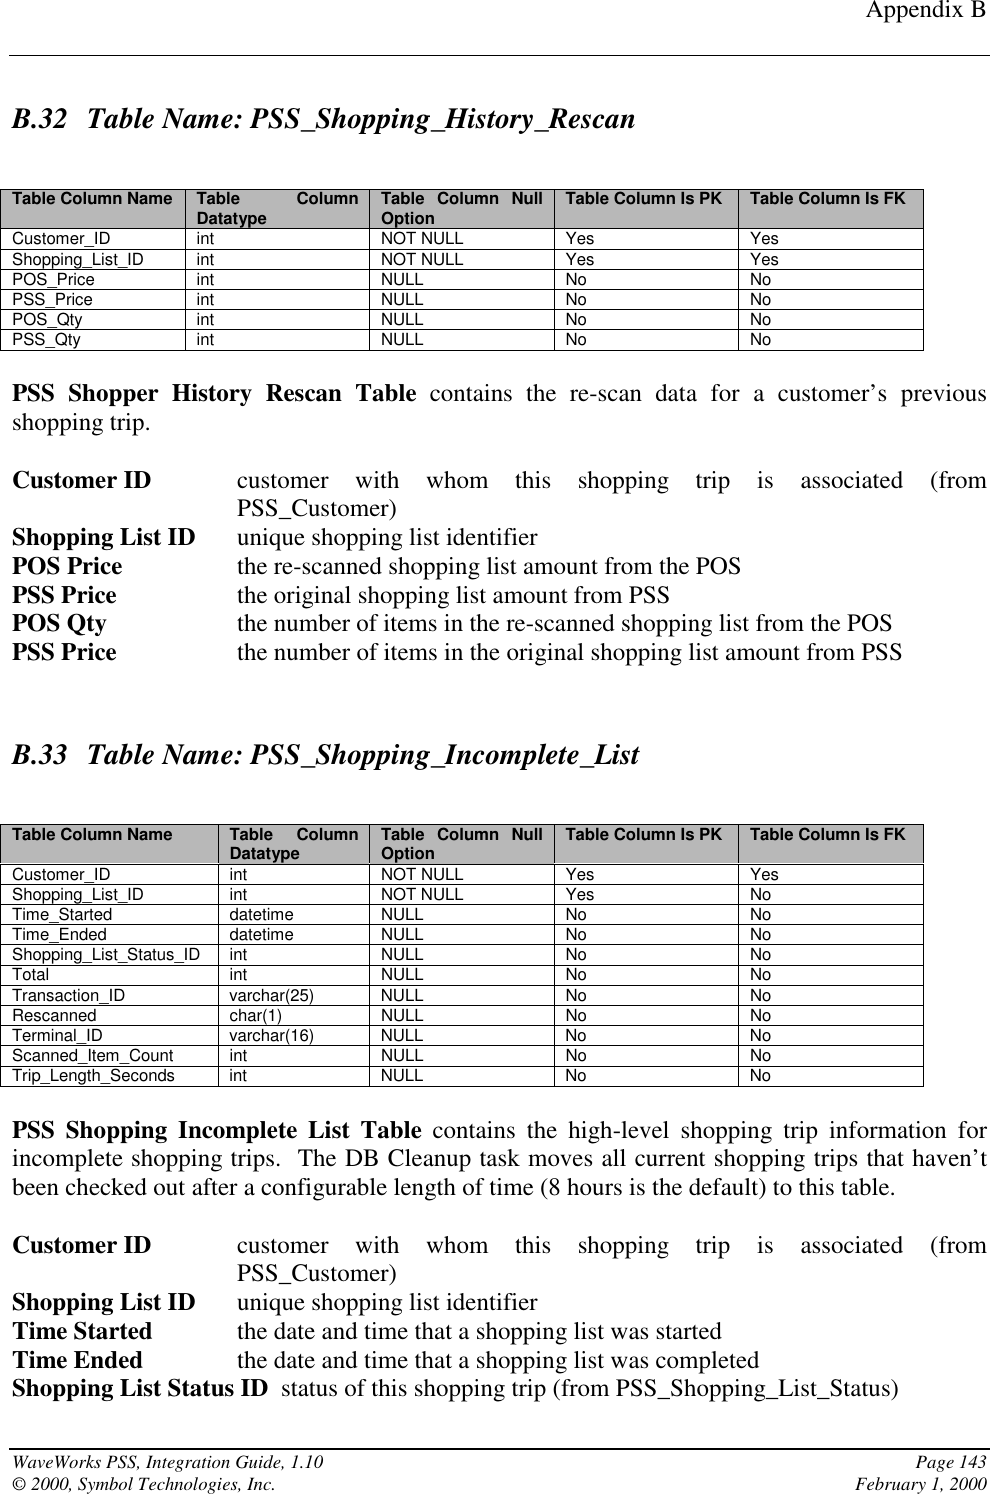 Appendix BWaveWorks PSS, Integration Guide, 1.10 Page 143© 2000, Symbol Technologies, Inc. February 1, 2000B.32 Table Name: PSS_Shopping_History_RescanTable Column Name Table ColumnDatatype Table Column NullOption Table Column Is PK Table Column Is FKCustomer_ID int NOT NULL Yes YesShopping_List_ID int NOT NULL Yes YesPOS_Price int NULL No NoPSS_Price int NULL No NoPOS_Qty int NULL No NoPSS_Qty int NULL No NoPSS Shopper History Rescan Table contains the re-scan data for a customer’s previousshopping trip.Customer ID customer with whom this shopping trip is associated (fromPSS_Customer)Shopping List ID unique shopping list identifierPOS Price the re-scanned shopping list amount from the POSPSS Price the original shopping list amount from PSSPOS Qty the number of items in the re-scanned shopping list from the POSPSS Price the number of items in the original shopping list amount from PSSB.33 Table Name: PSS_Shopping_Incomplete_ListTable Column Name Table ColumnDatatype Table Column NullOption Table Column Is PK Table Column Is FKCustomer_ID int NOT NULL Yes YesShopping_List_ID int NOT NULL Yes NoTime_Started datetime NULL No NoTime_Ended datetime NULL No NoShopping_List_Status_ID int NULL No NoTotal int NULL No NoTransaction_ID varchar(25) NULL No NoRescanned char(1) NULL No NoTerminal_ID varchar(16) NULL No NoScanned_Item_Count int NULL No NoTrip_Length_Seconds int NULL No NoPSS Shopping Incomplete List Table contains the high-level shopping trip information forincomplete shopping trips.  The DB Cleanup task moves all current shopping trips that haven’tbeen checked out after a configurable length of time (8 hours is the default) to this table.Customer ID customer with whom this shopping trip is associated (fromPSS_Customer)Shopping List ID unique shopping list identifierTime Started the date and time that a shopping list was startedTime Ended the date and time that a shopping list was completedShopping List Status ID  status of this shopping trip (from PSS_Shopping_List_Status)